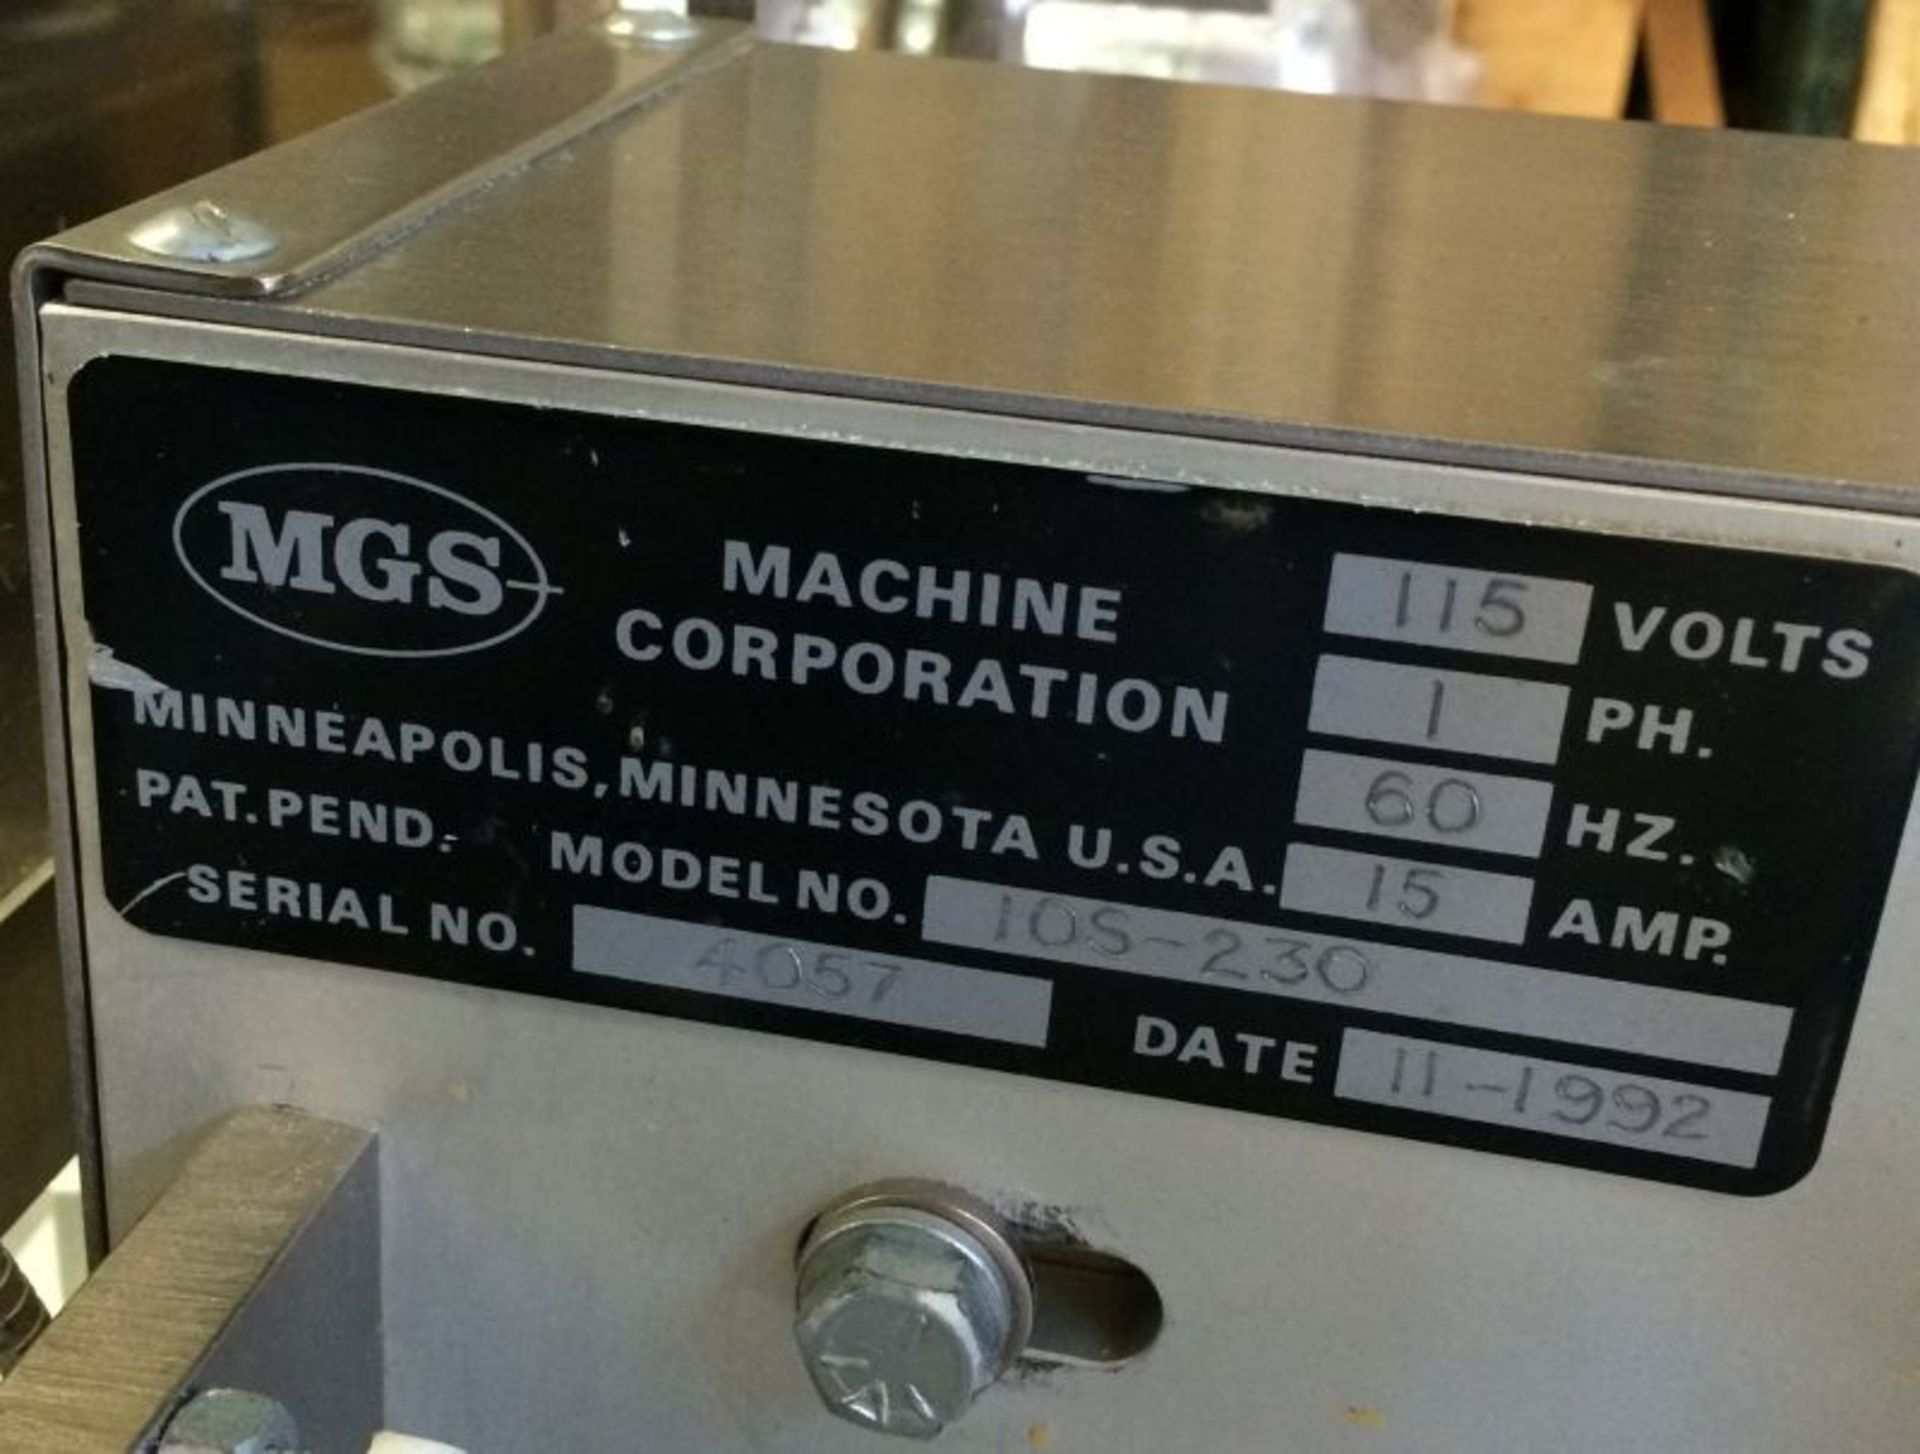 MGS Leaflet Inserter - Model 105-230, Serial 4057, 115 Volts, 1 Phase, 60 Hz, 15 Amp, Machine is - Image 7 of 7